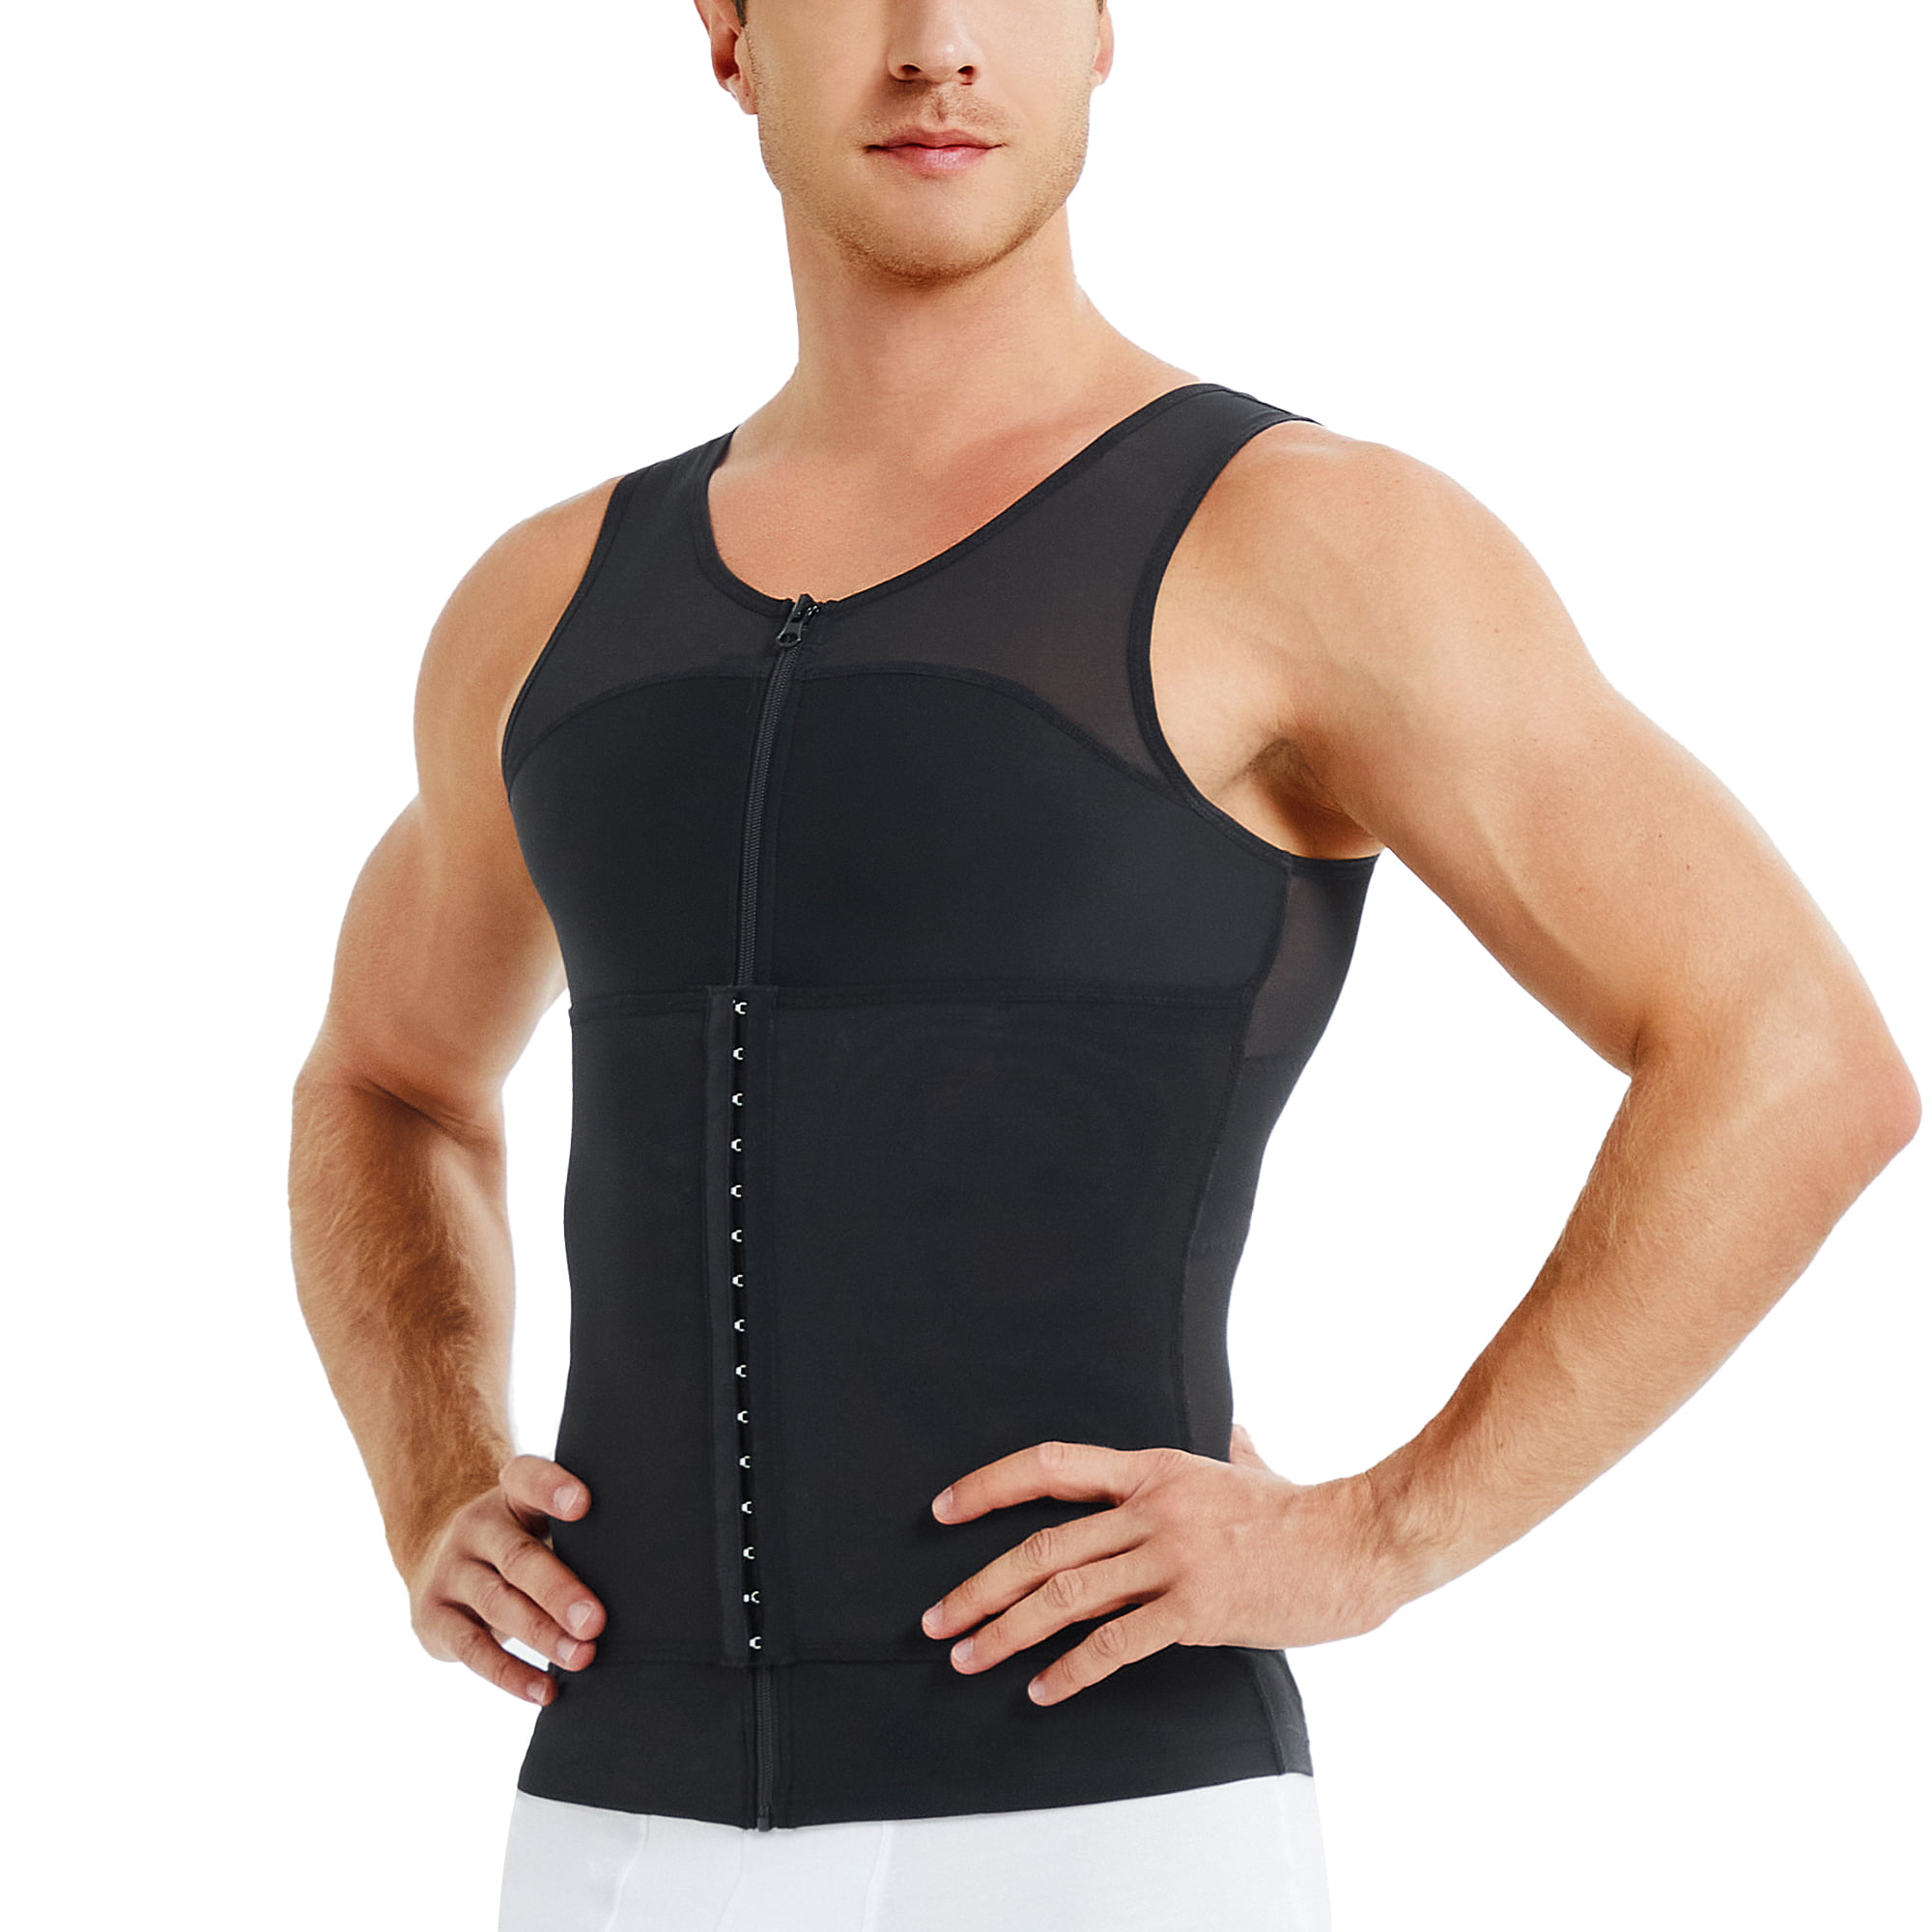 Men's shapewear tank top, waist and belly control, M to 3XL